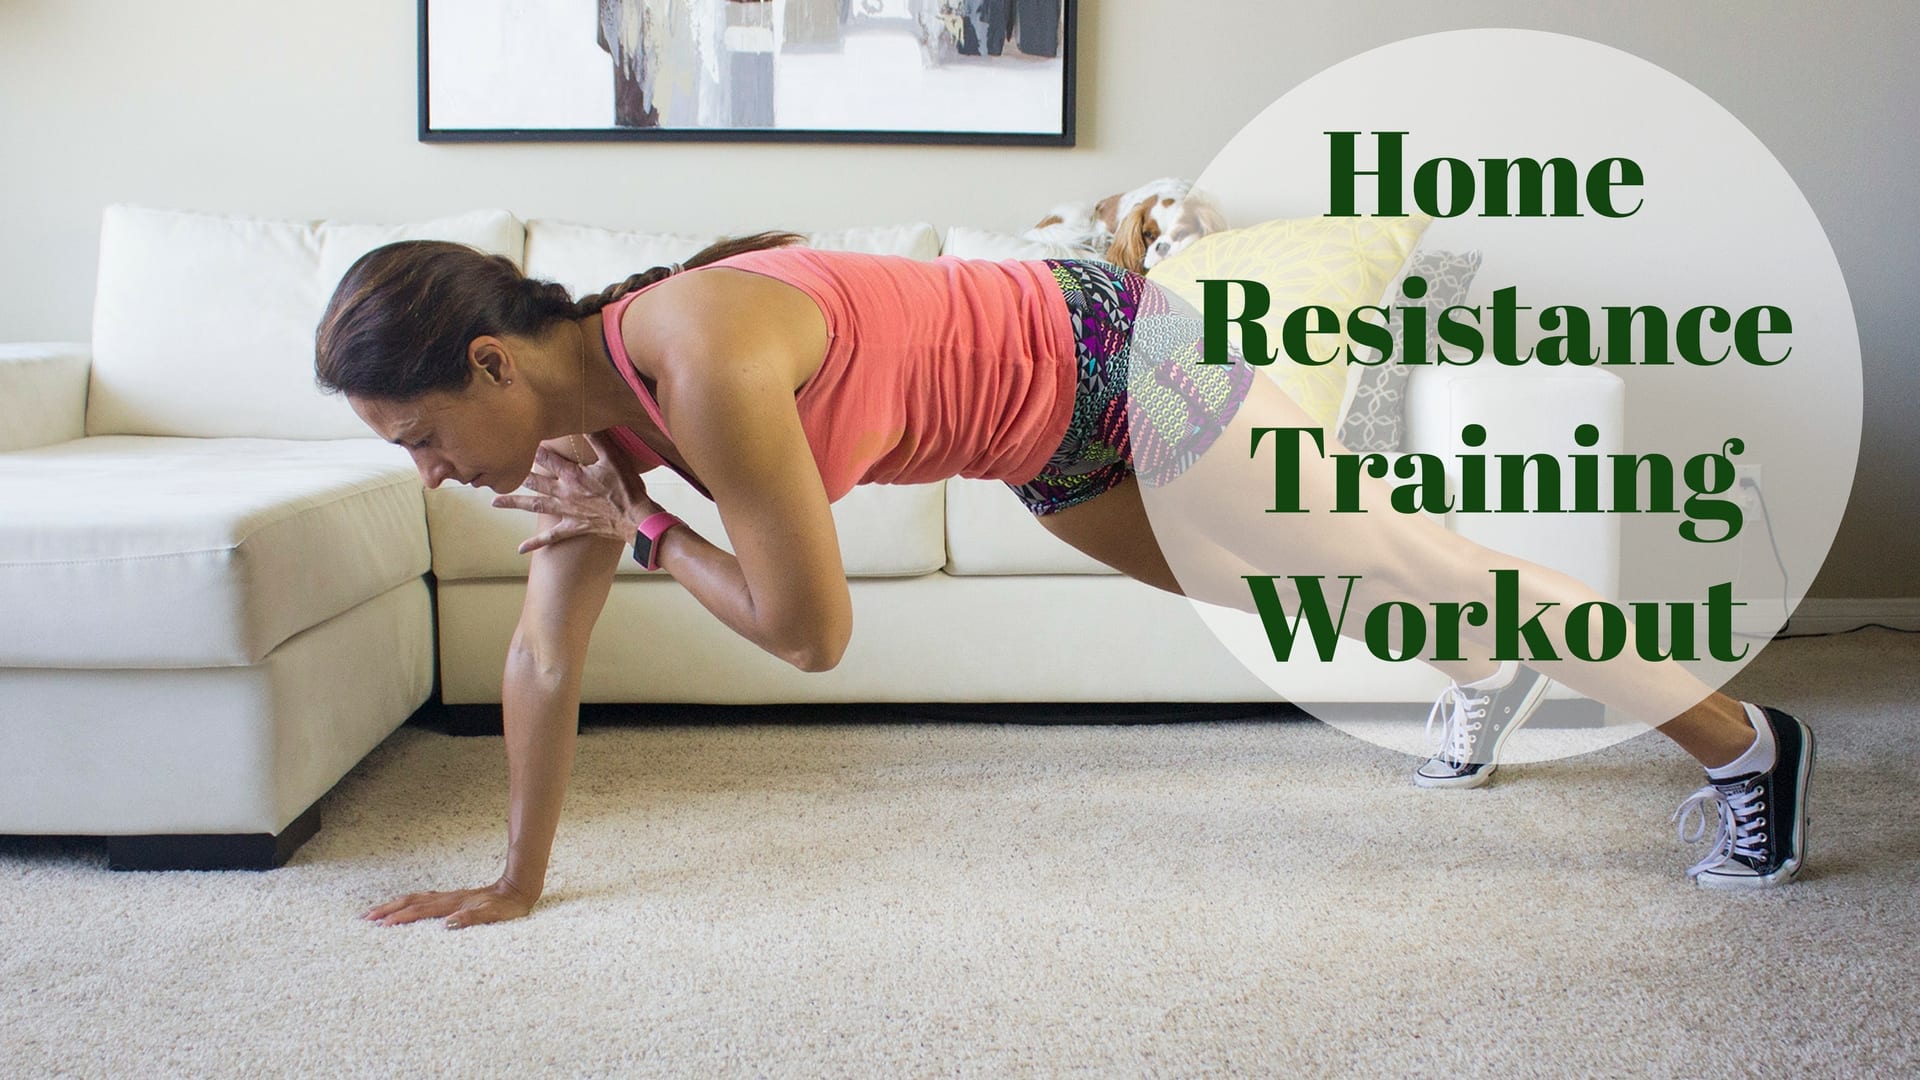 Resistance Training Workout You Can Do at Home - Diabetes Strong